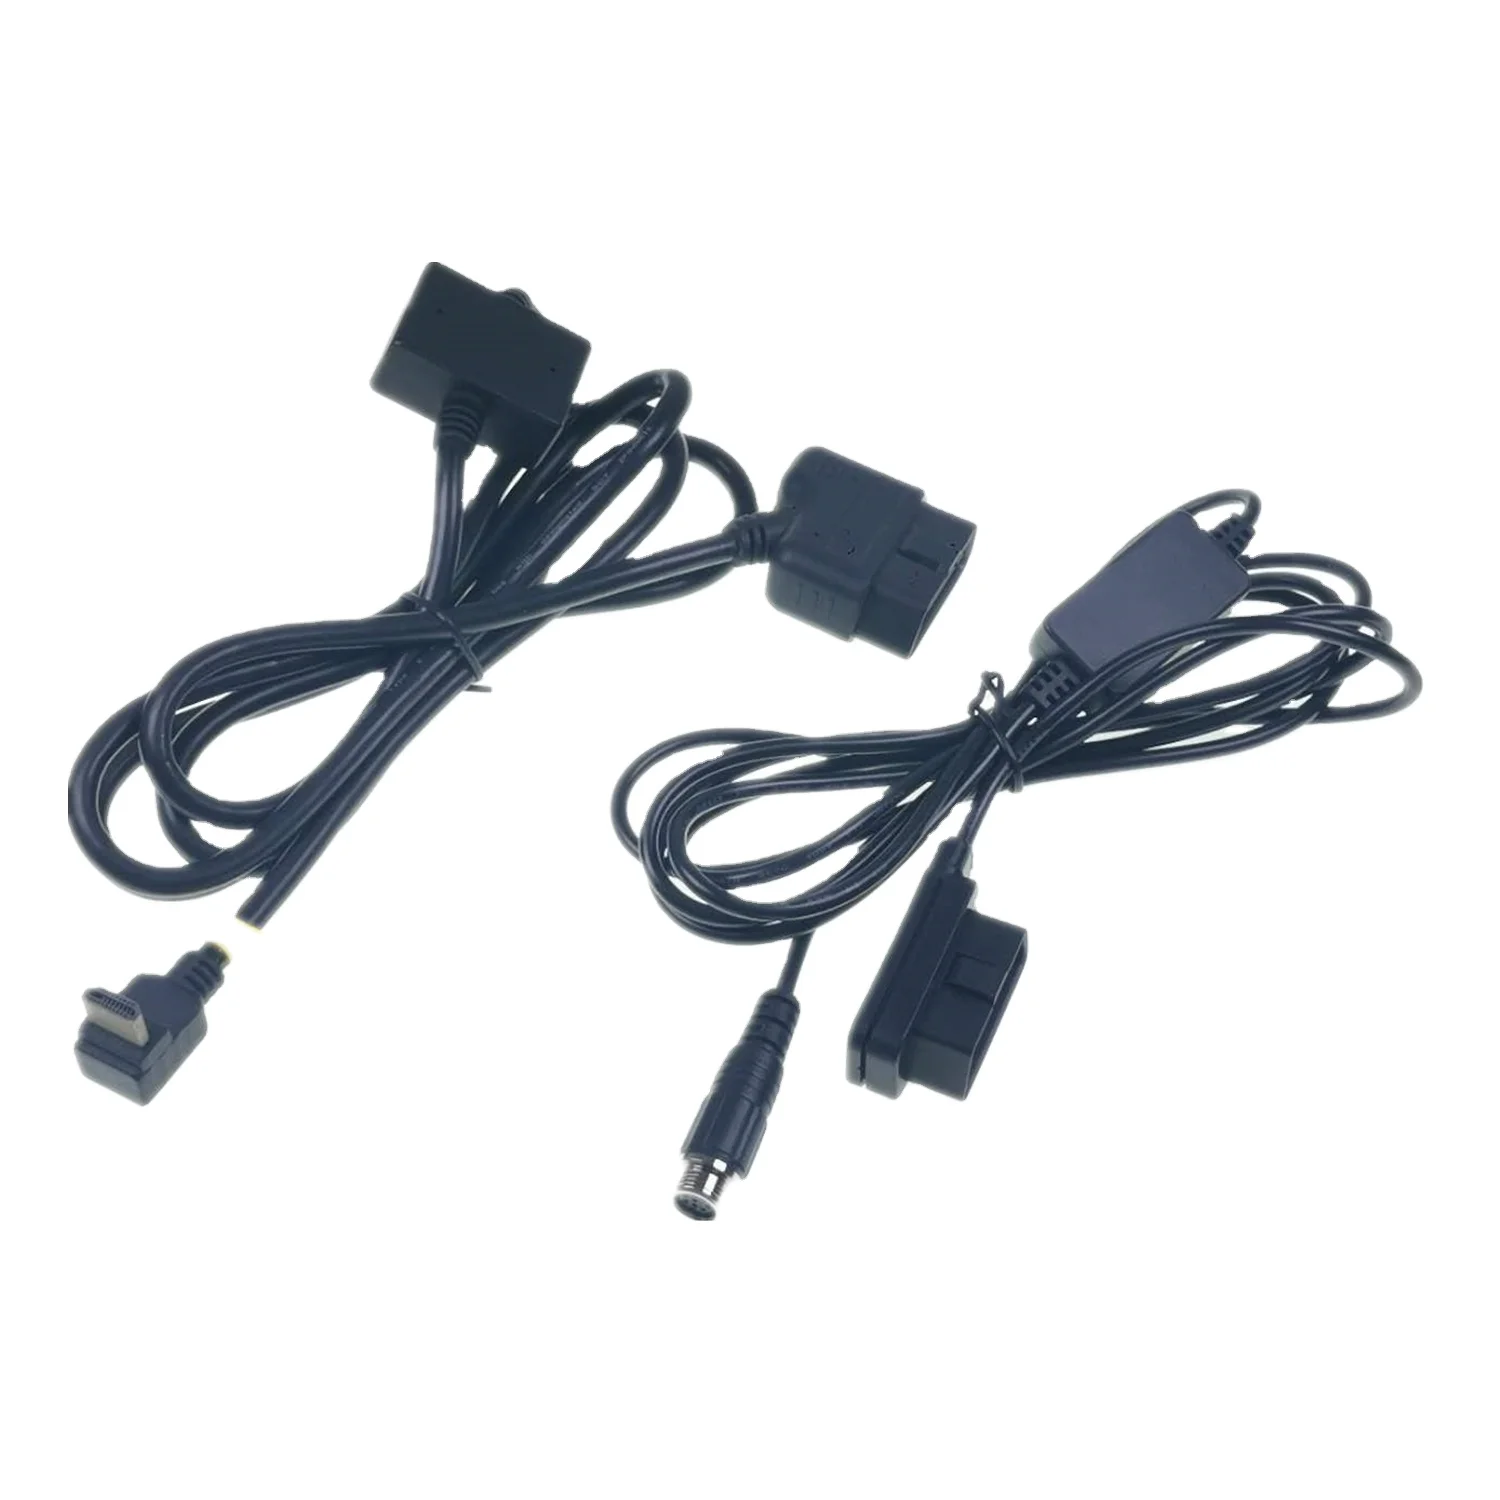 Power Seat Wiring Harness Truck Vehicle Cable Jpod to 9 Pin J1939 Type 2 Y Cable J1962 Obdii Cable Automobile Deutsch J1939 Obd